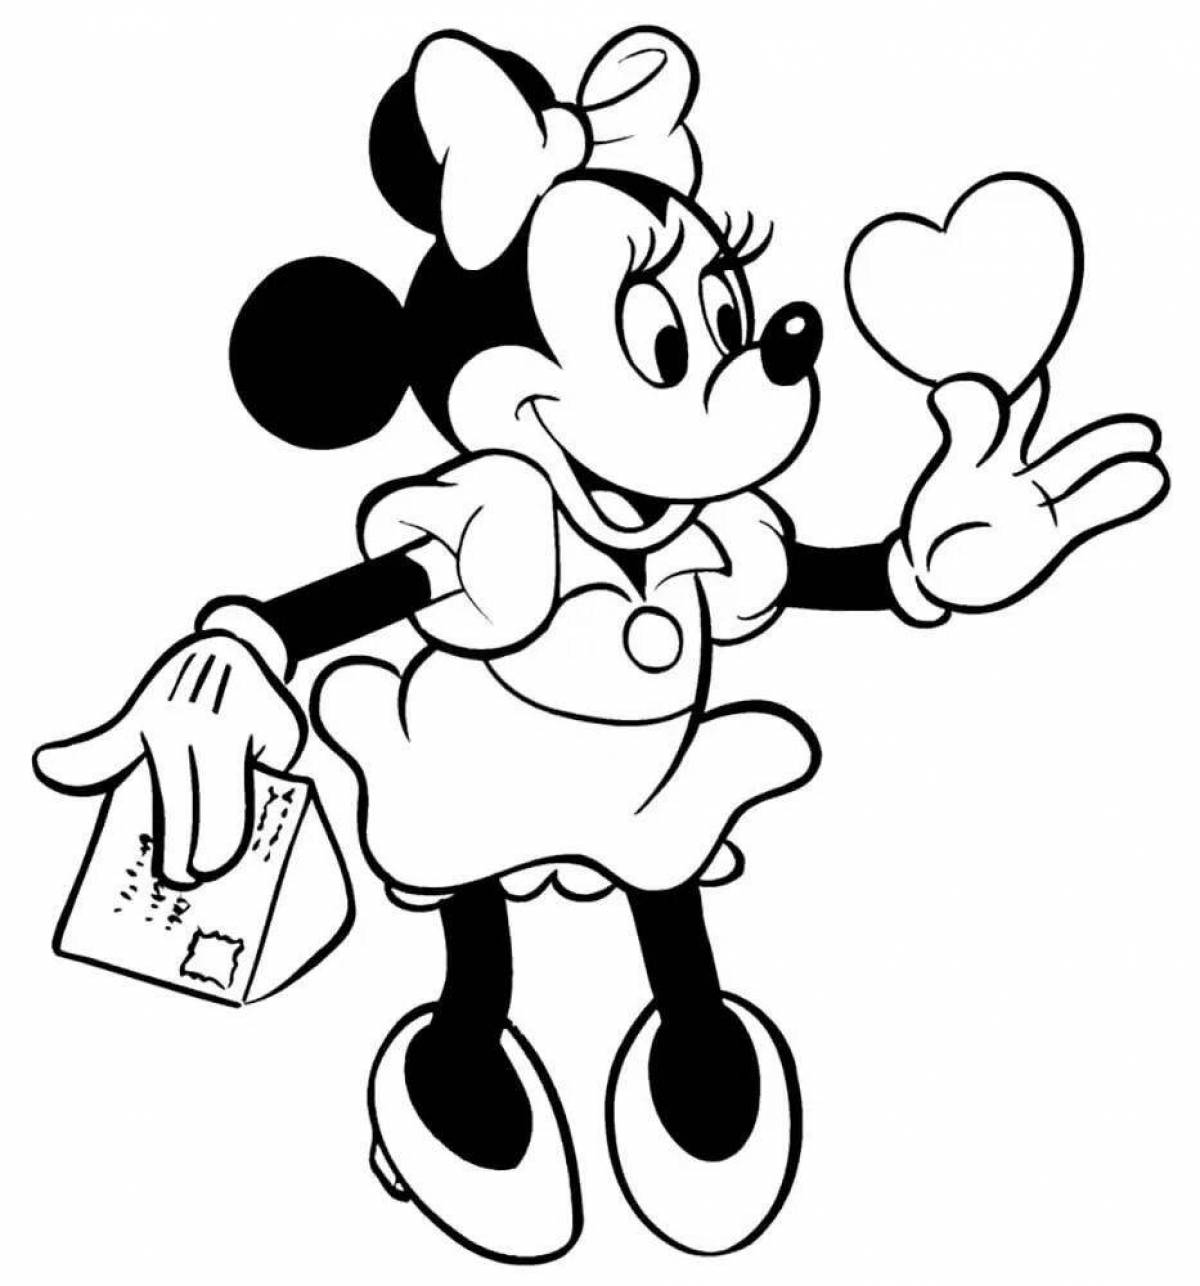 Violent coloring of minnie mouse for children